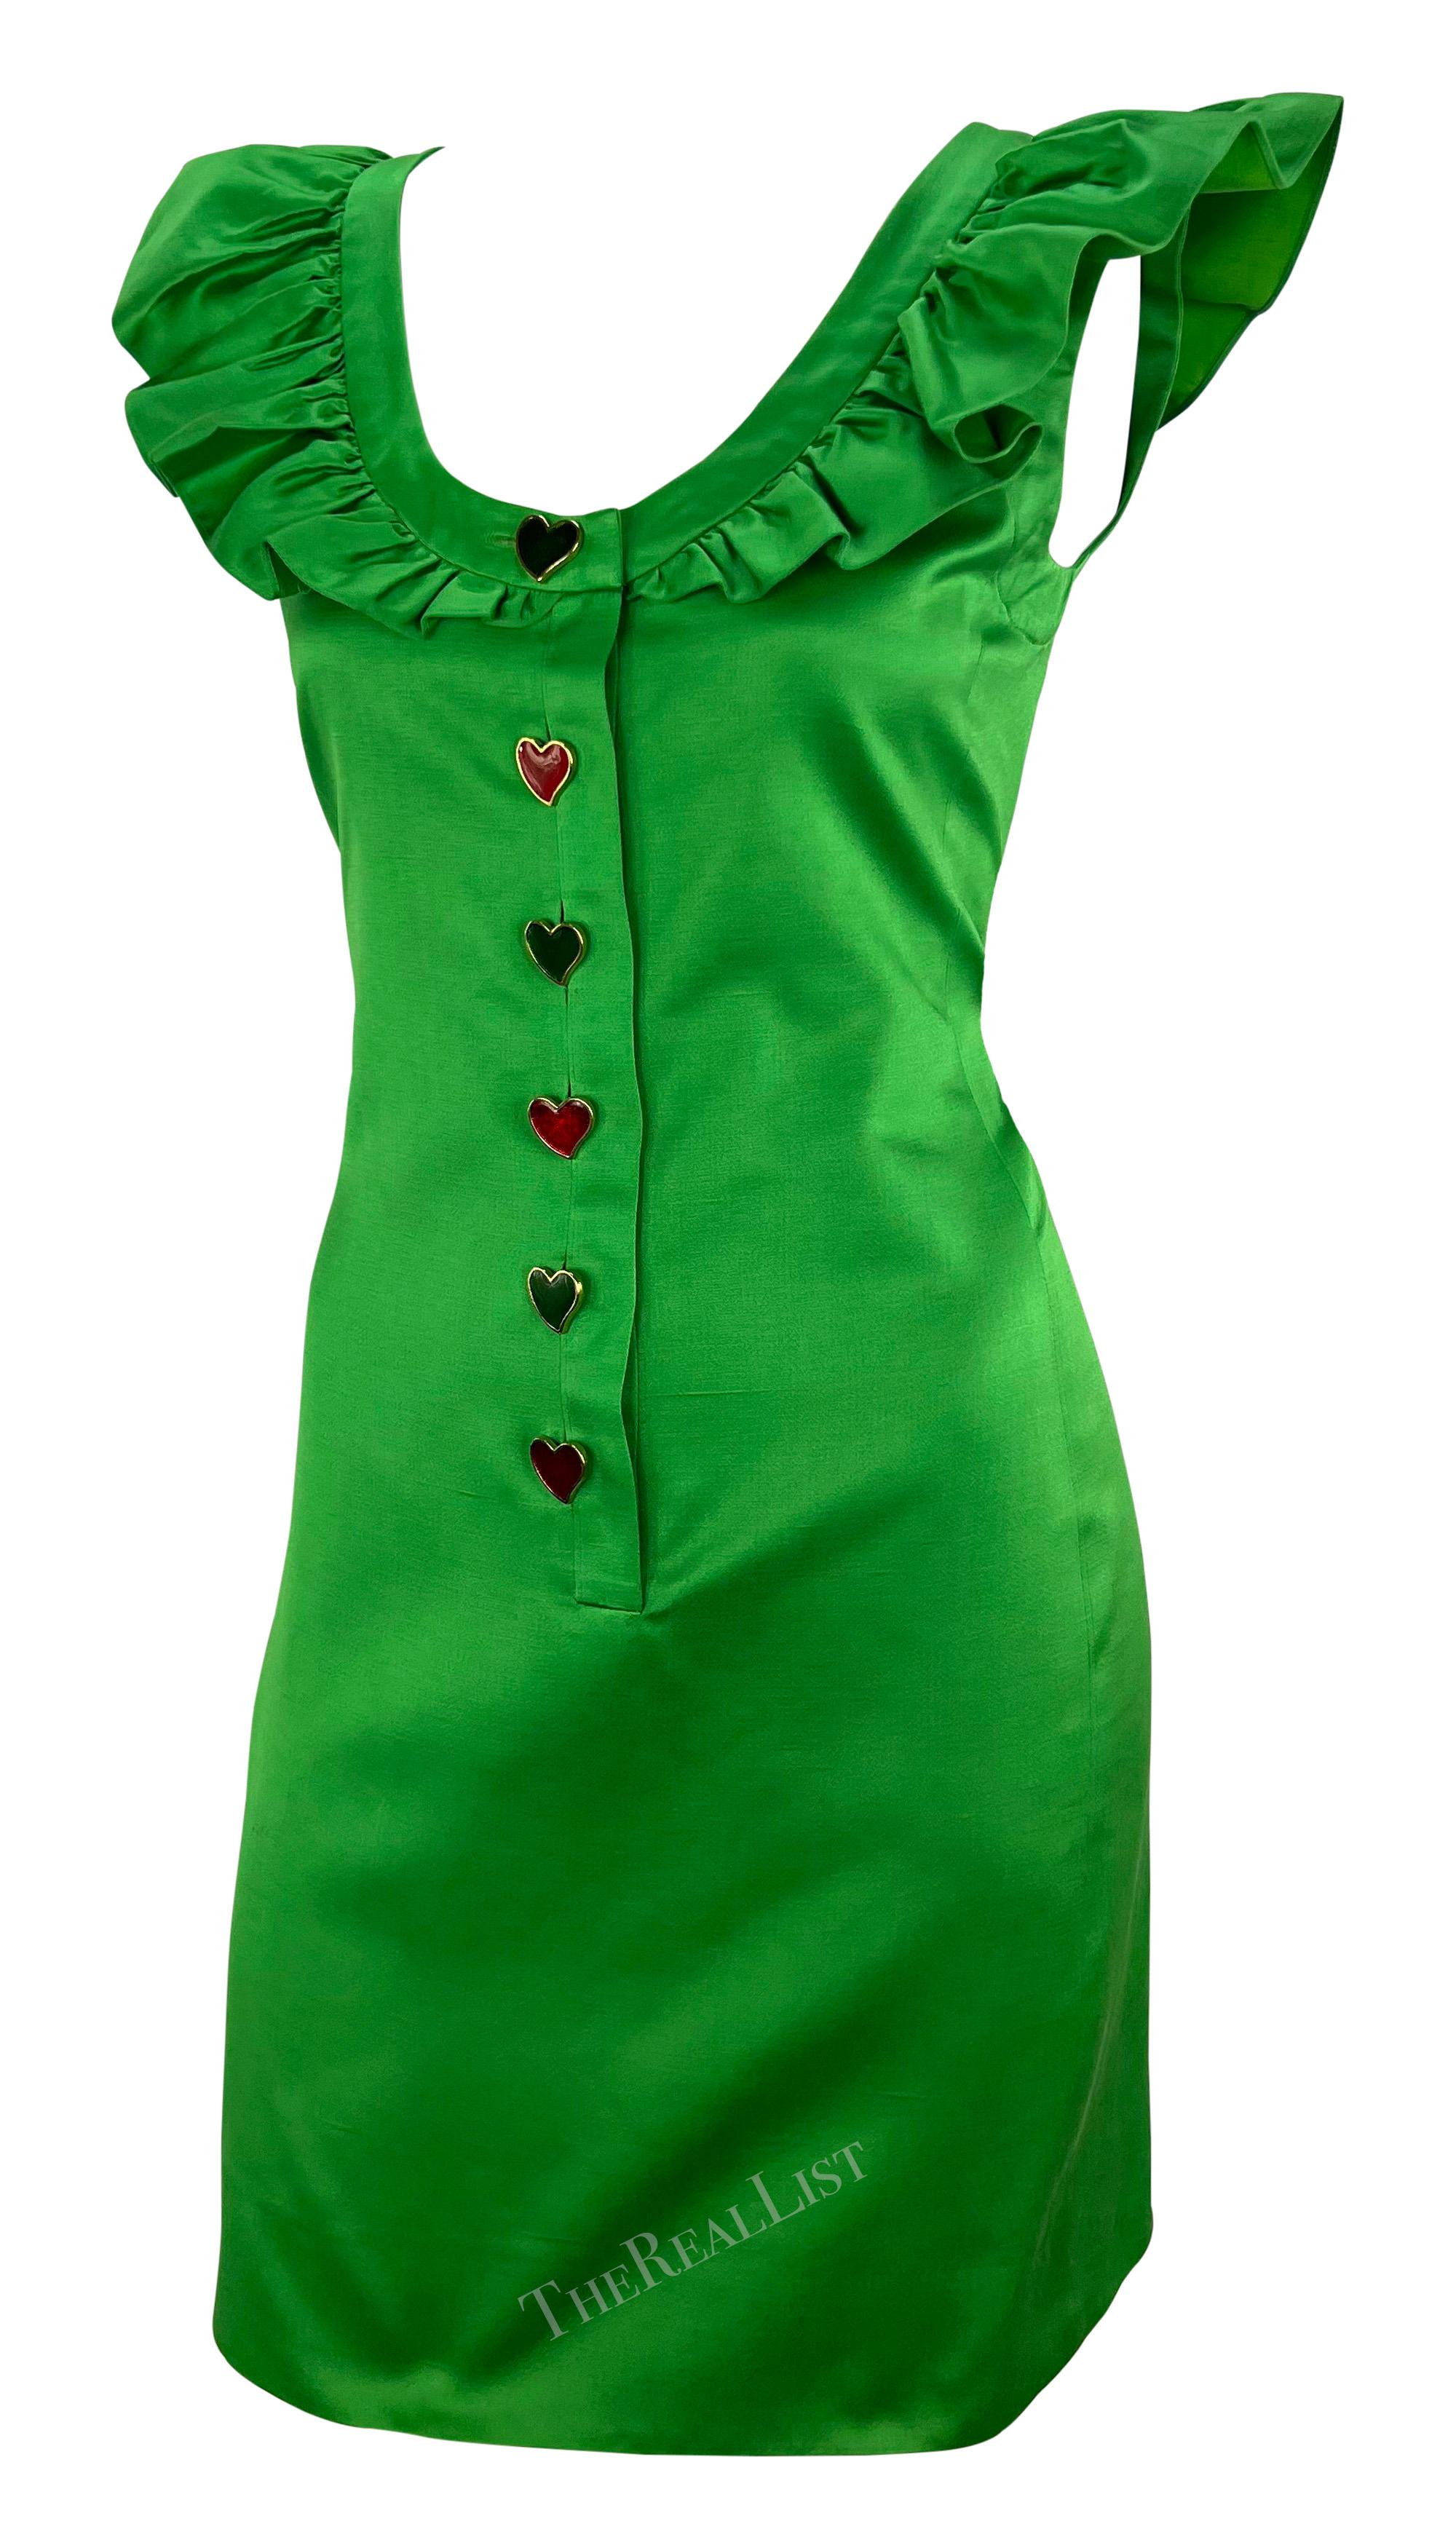 S/S 1992 Yves Saint Laurent Runway Ad Bright Green Ruffle Heart Button Dress For Sale 1